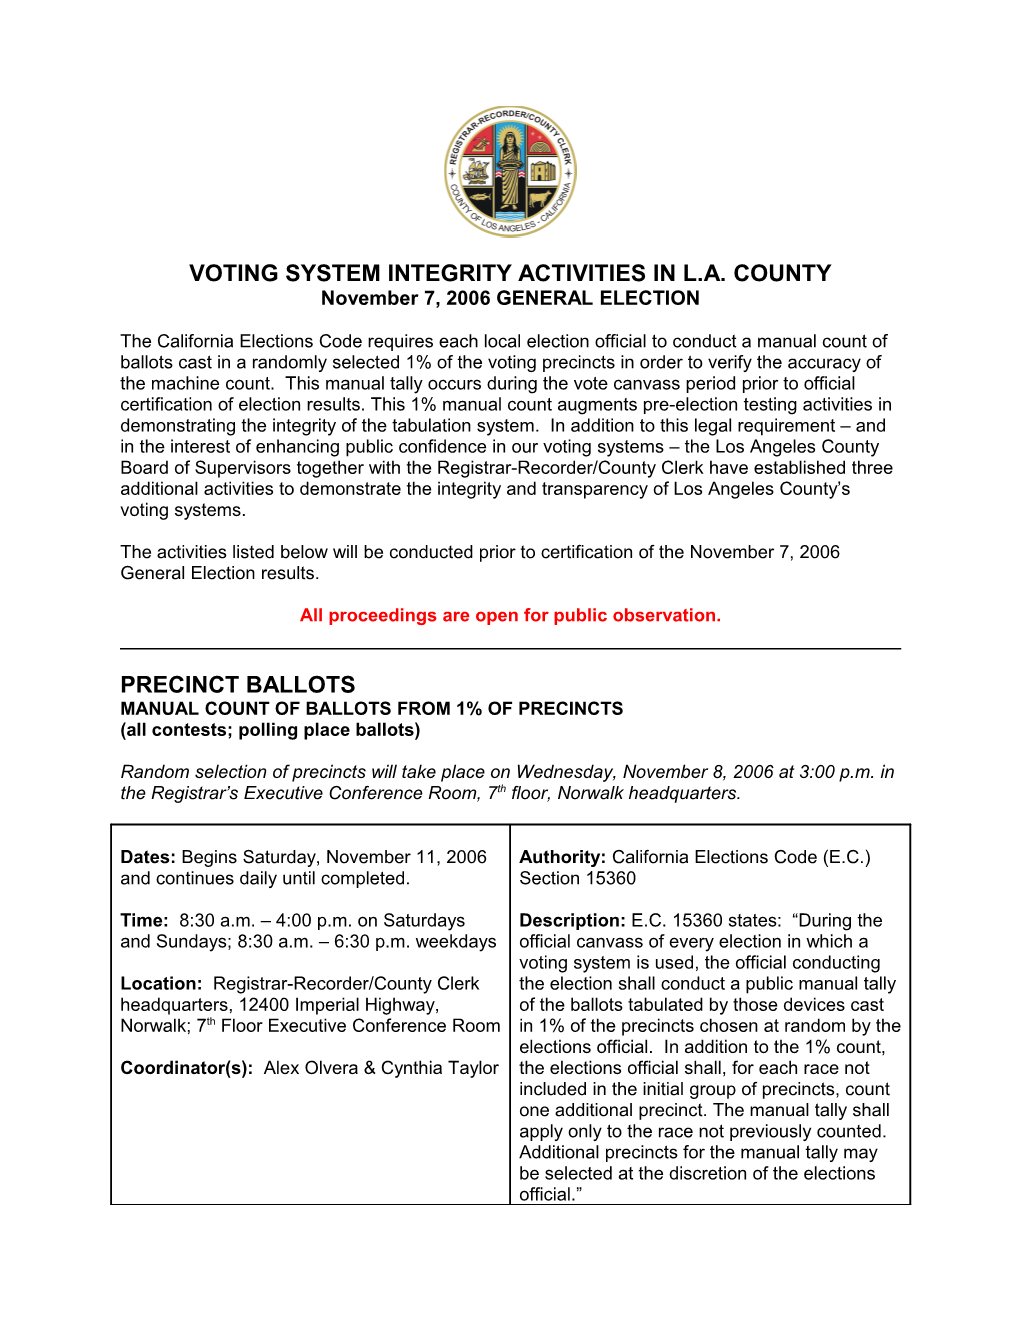 Voting System Integrity Activities